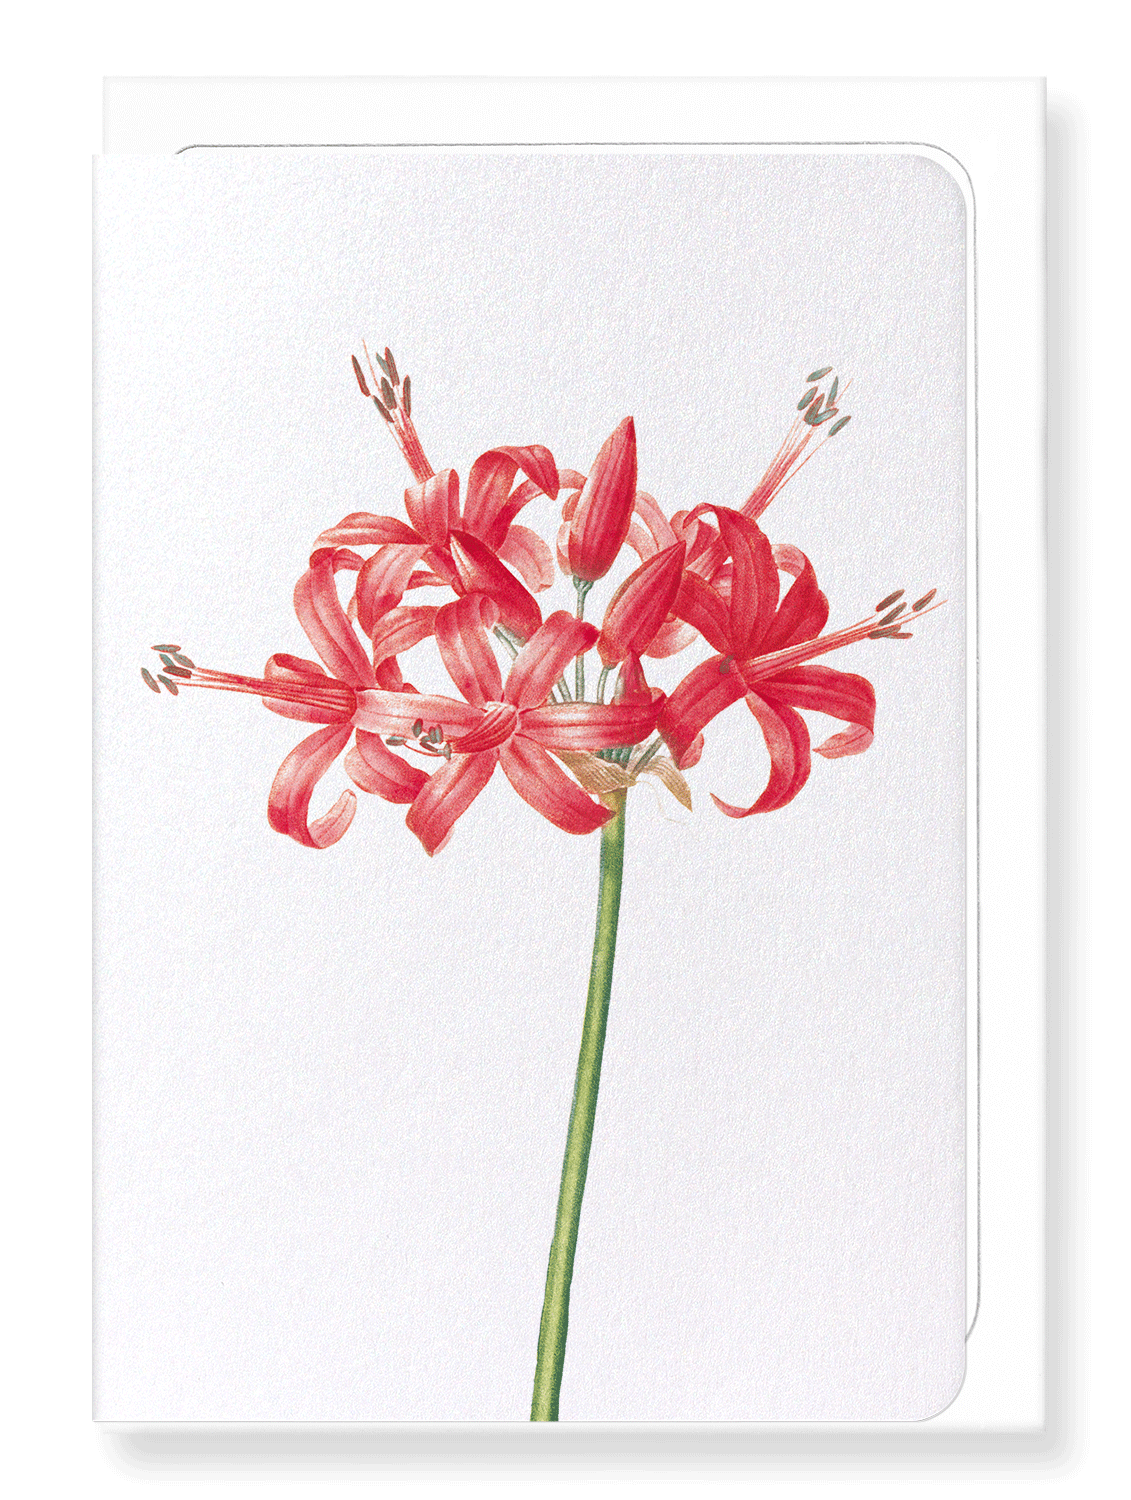 Ezen Designs - Guernsey or jersey lily (detail) - Greeting Card - Front